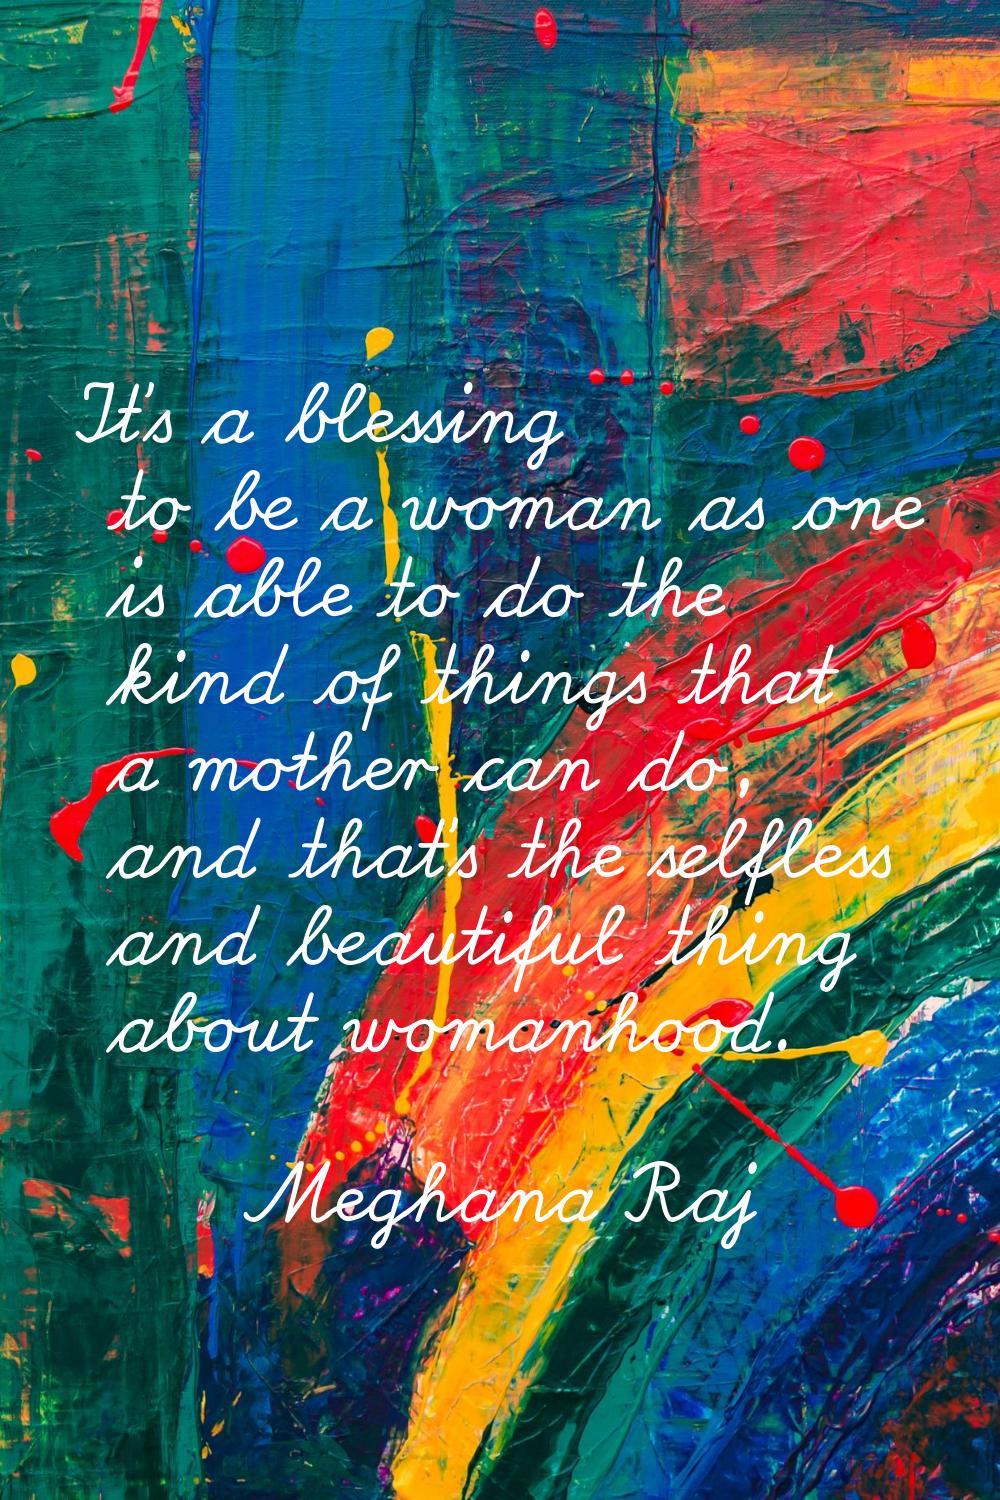 It's a blessing to be a woman as one is able to do the kind of things that a mother can do, and tha